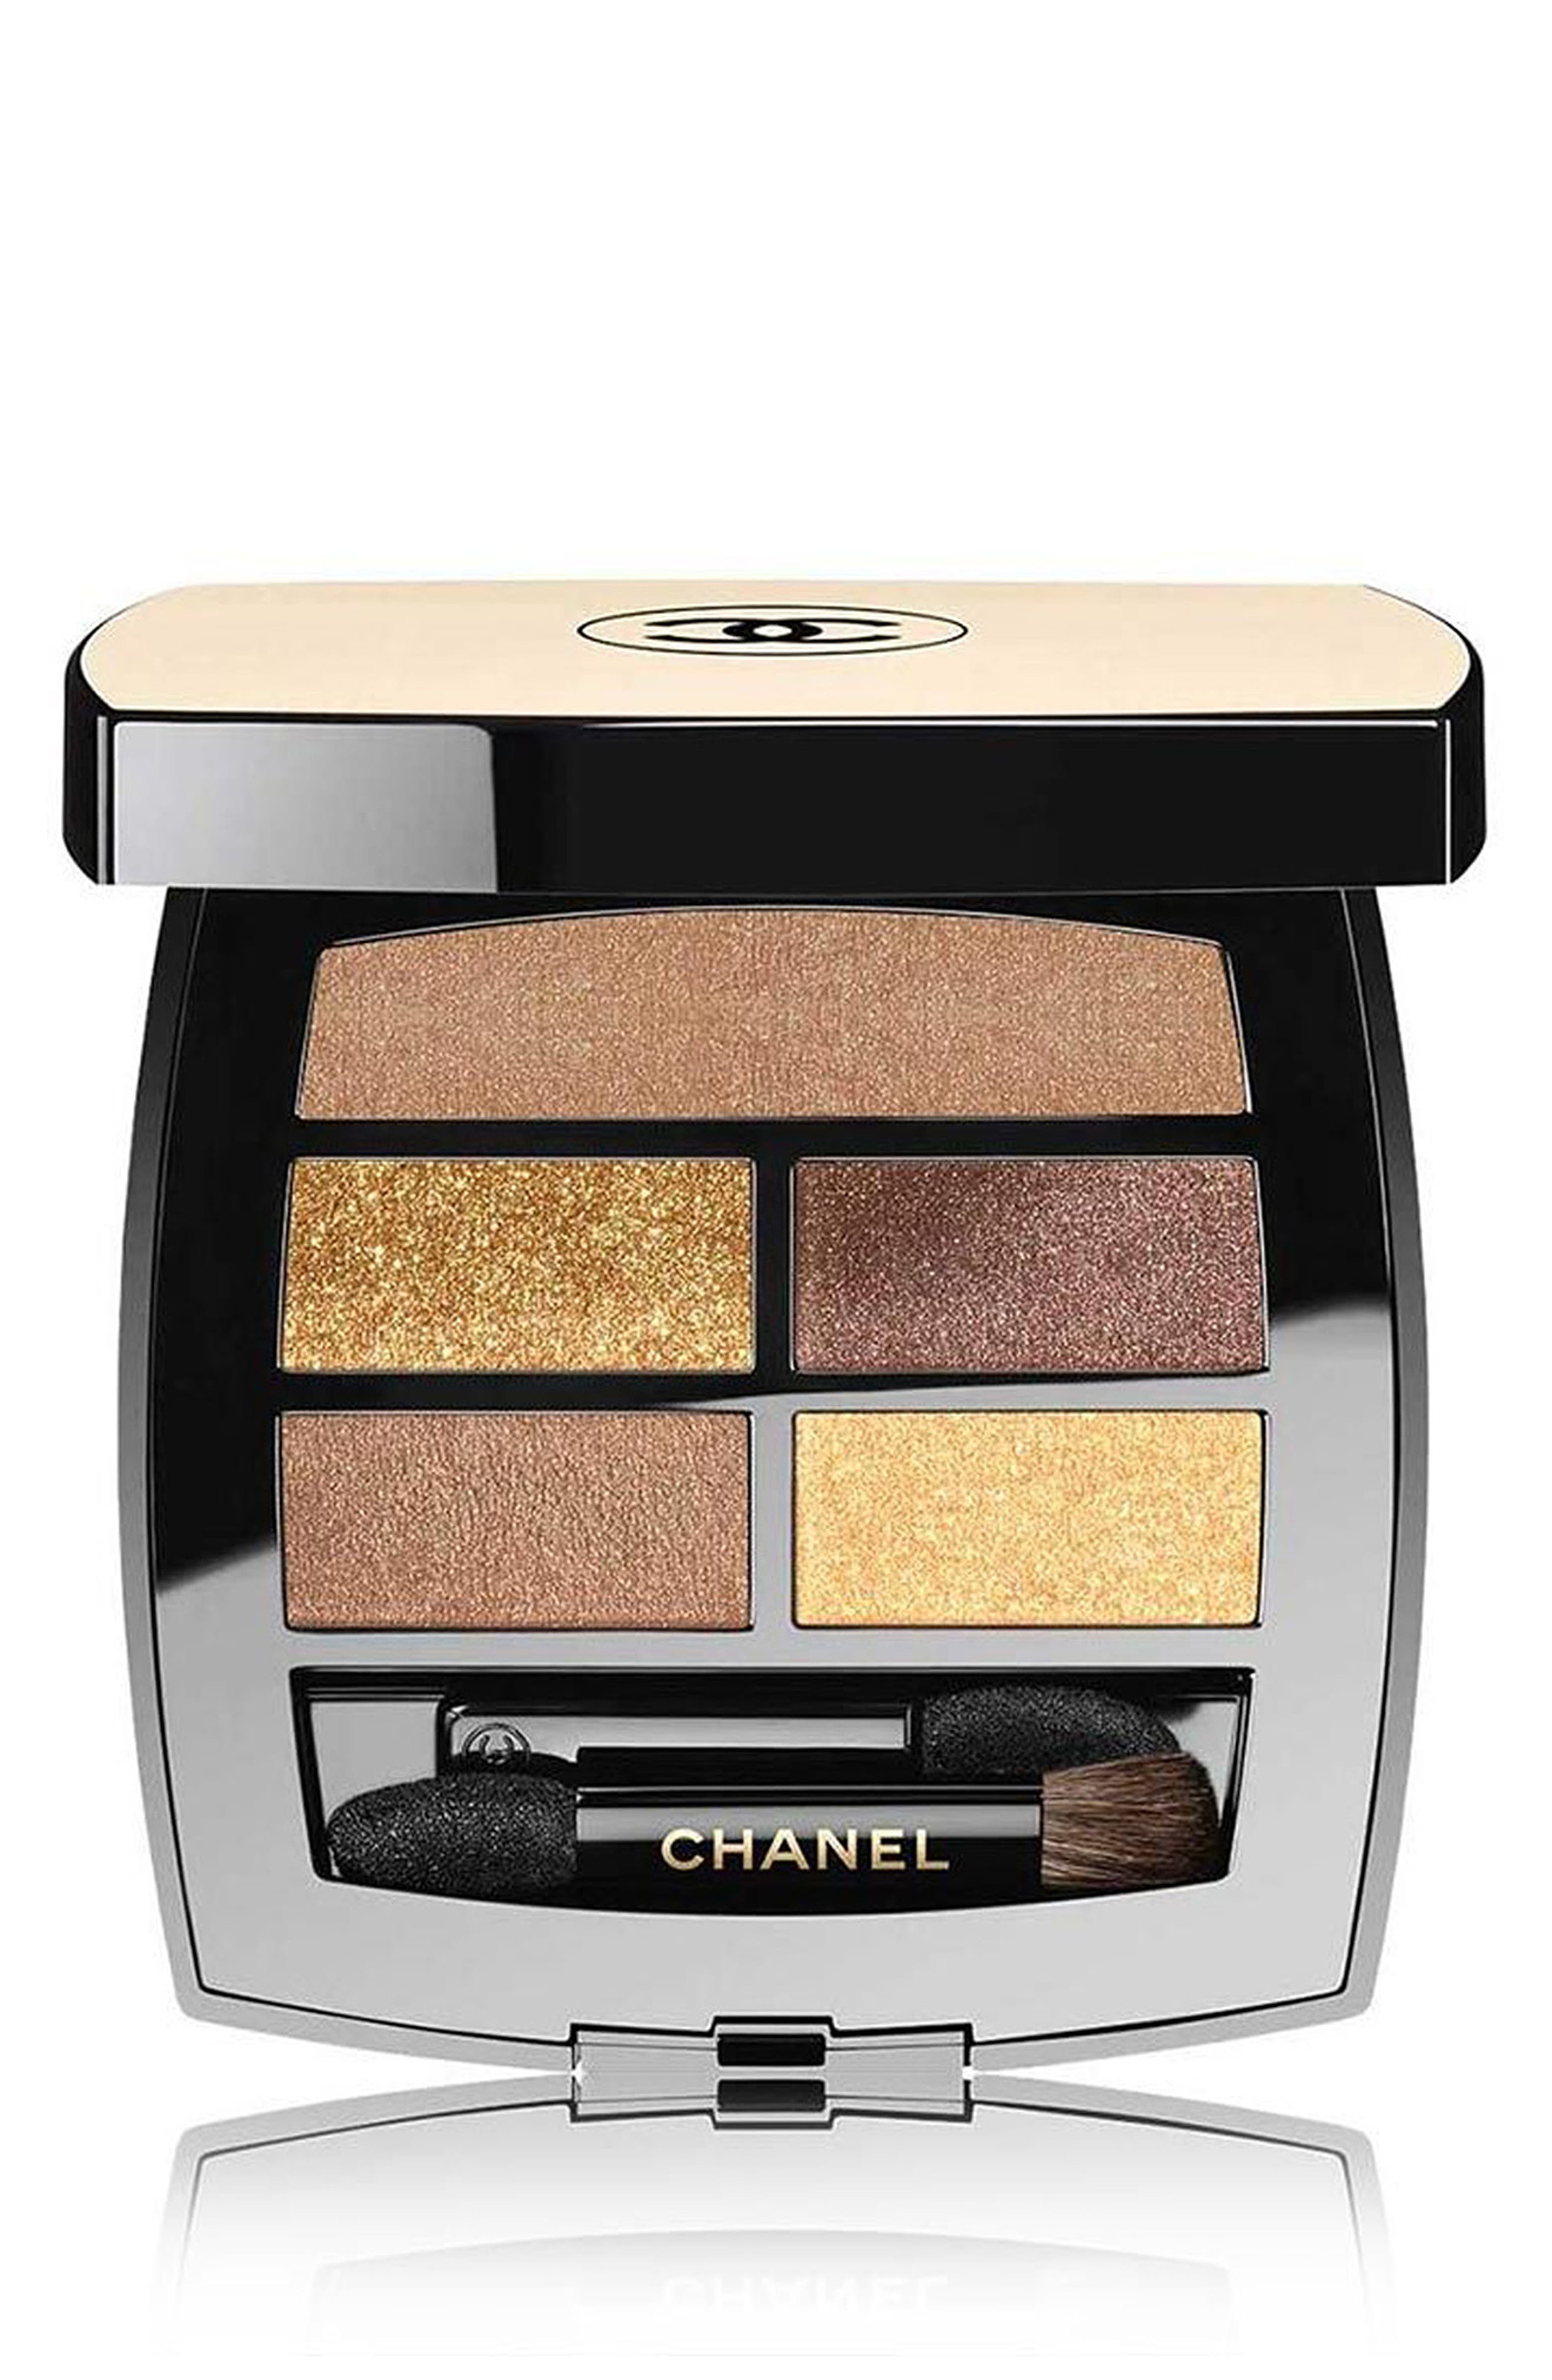 CHANEL LES BEIGES HEALTHY GLOW Natural Eyeshadow Palette Nordstrom